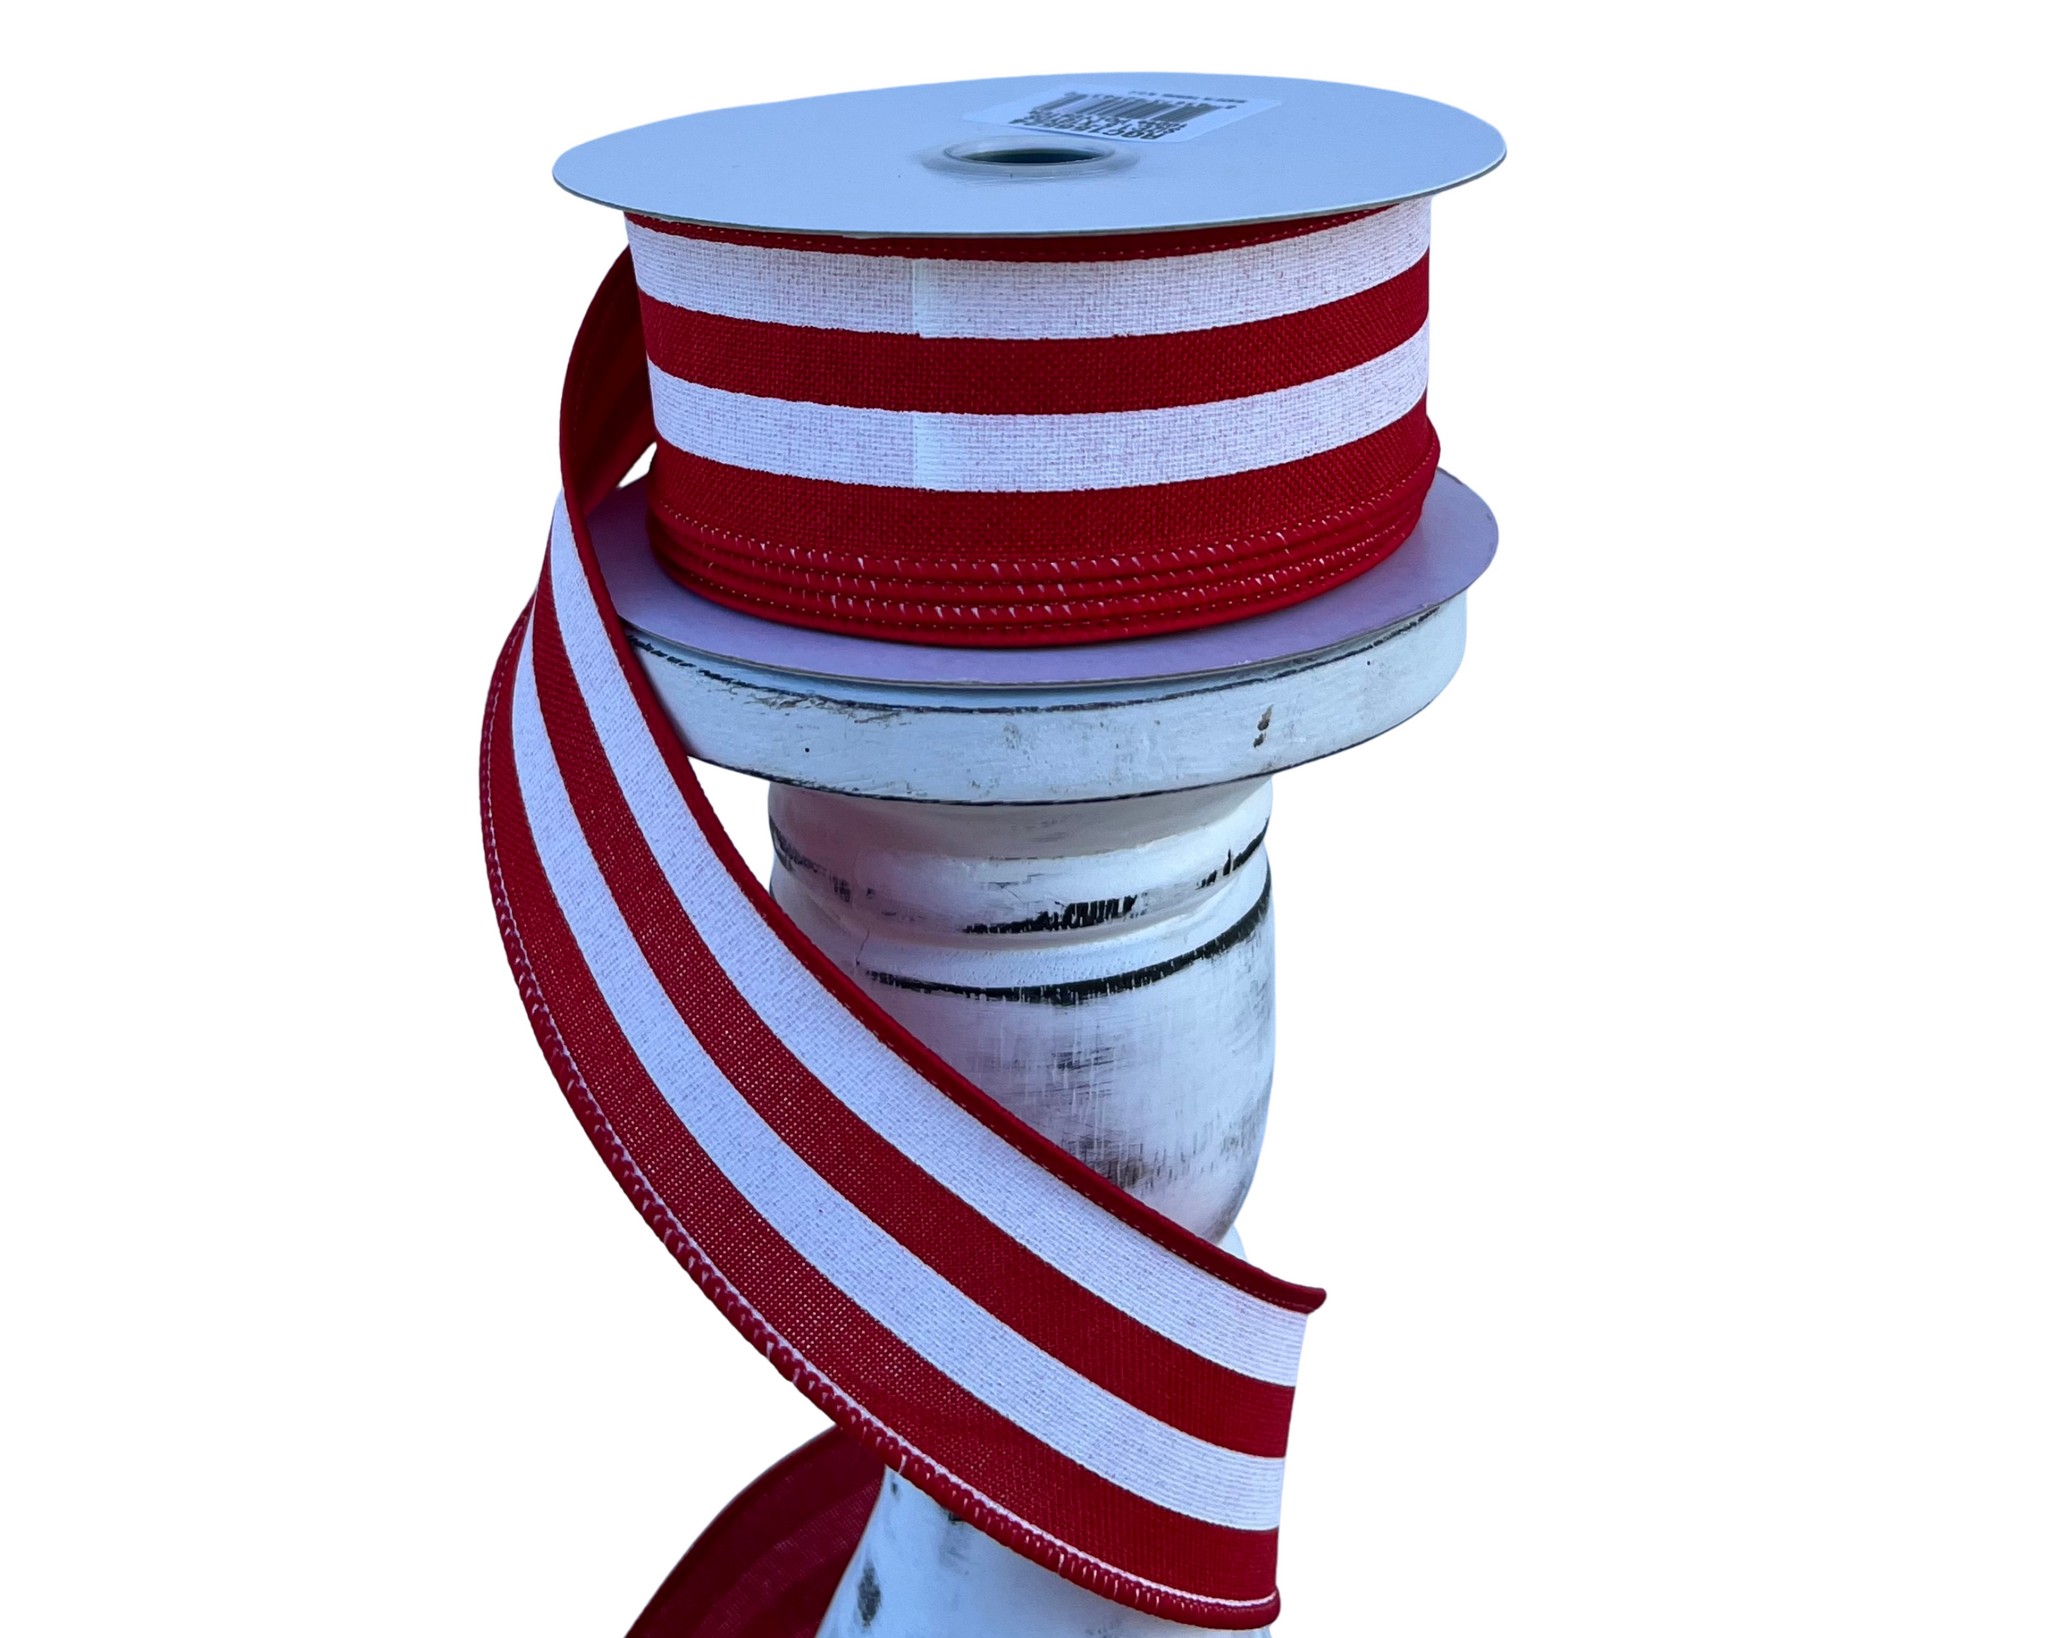 1.5x10YD Vertical Striped Red Wired Christmas Ribbon - White/Red - Festive  Accent for Holiday Crafts and Decor-RGC156524